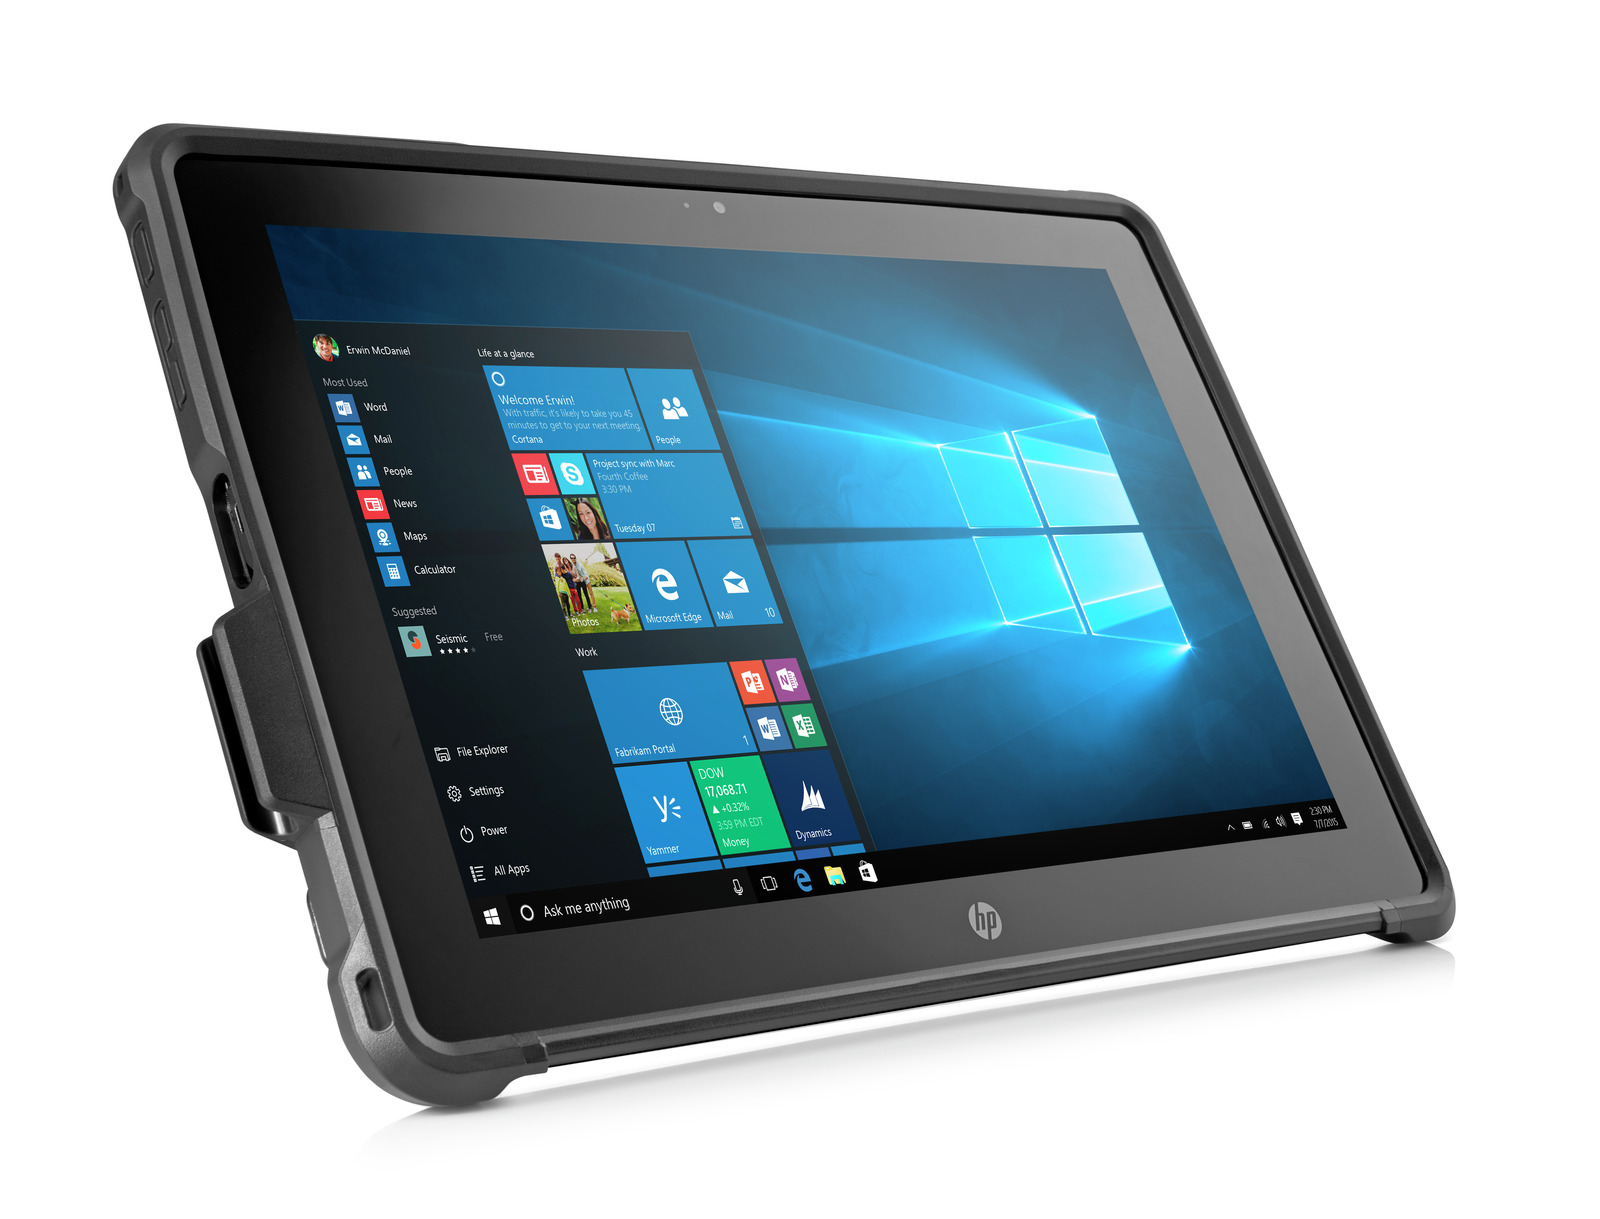 The HP Pro x2 512 G2 with Windows 10